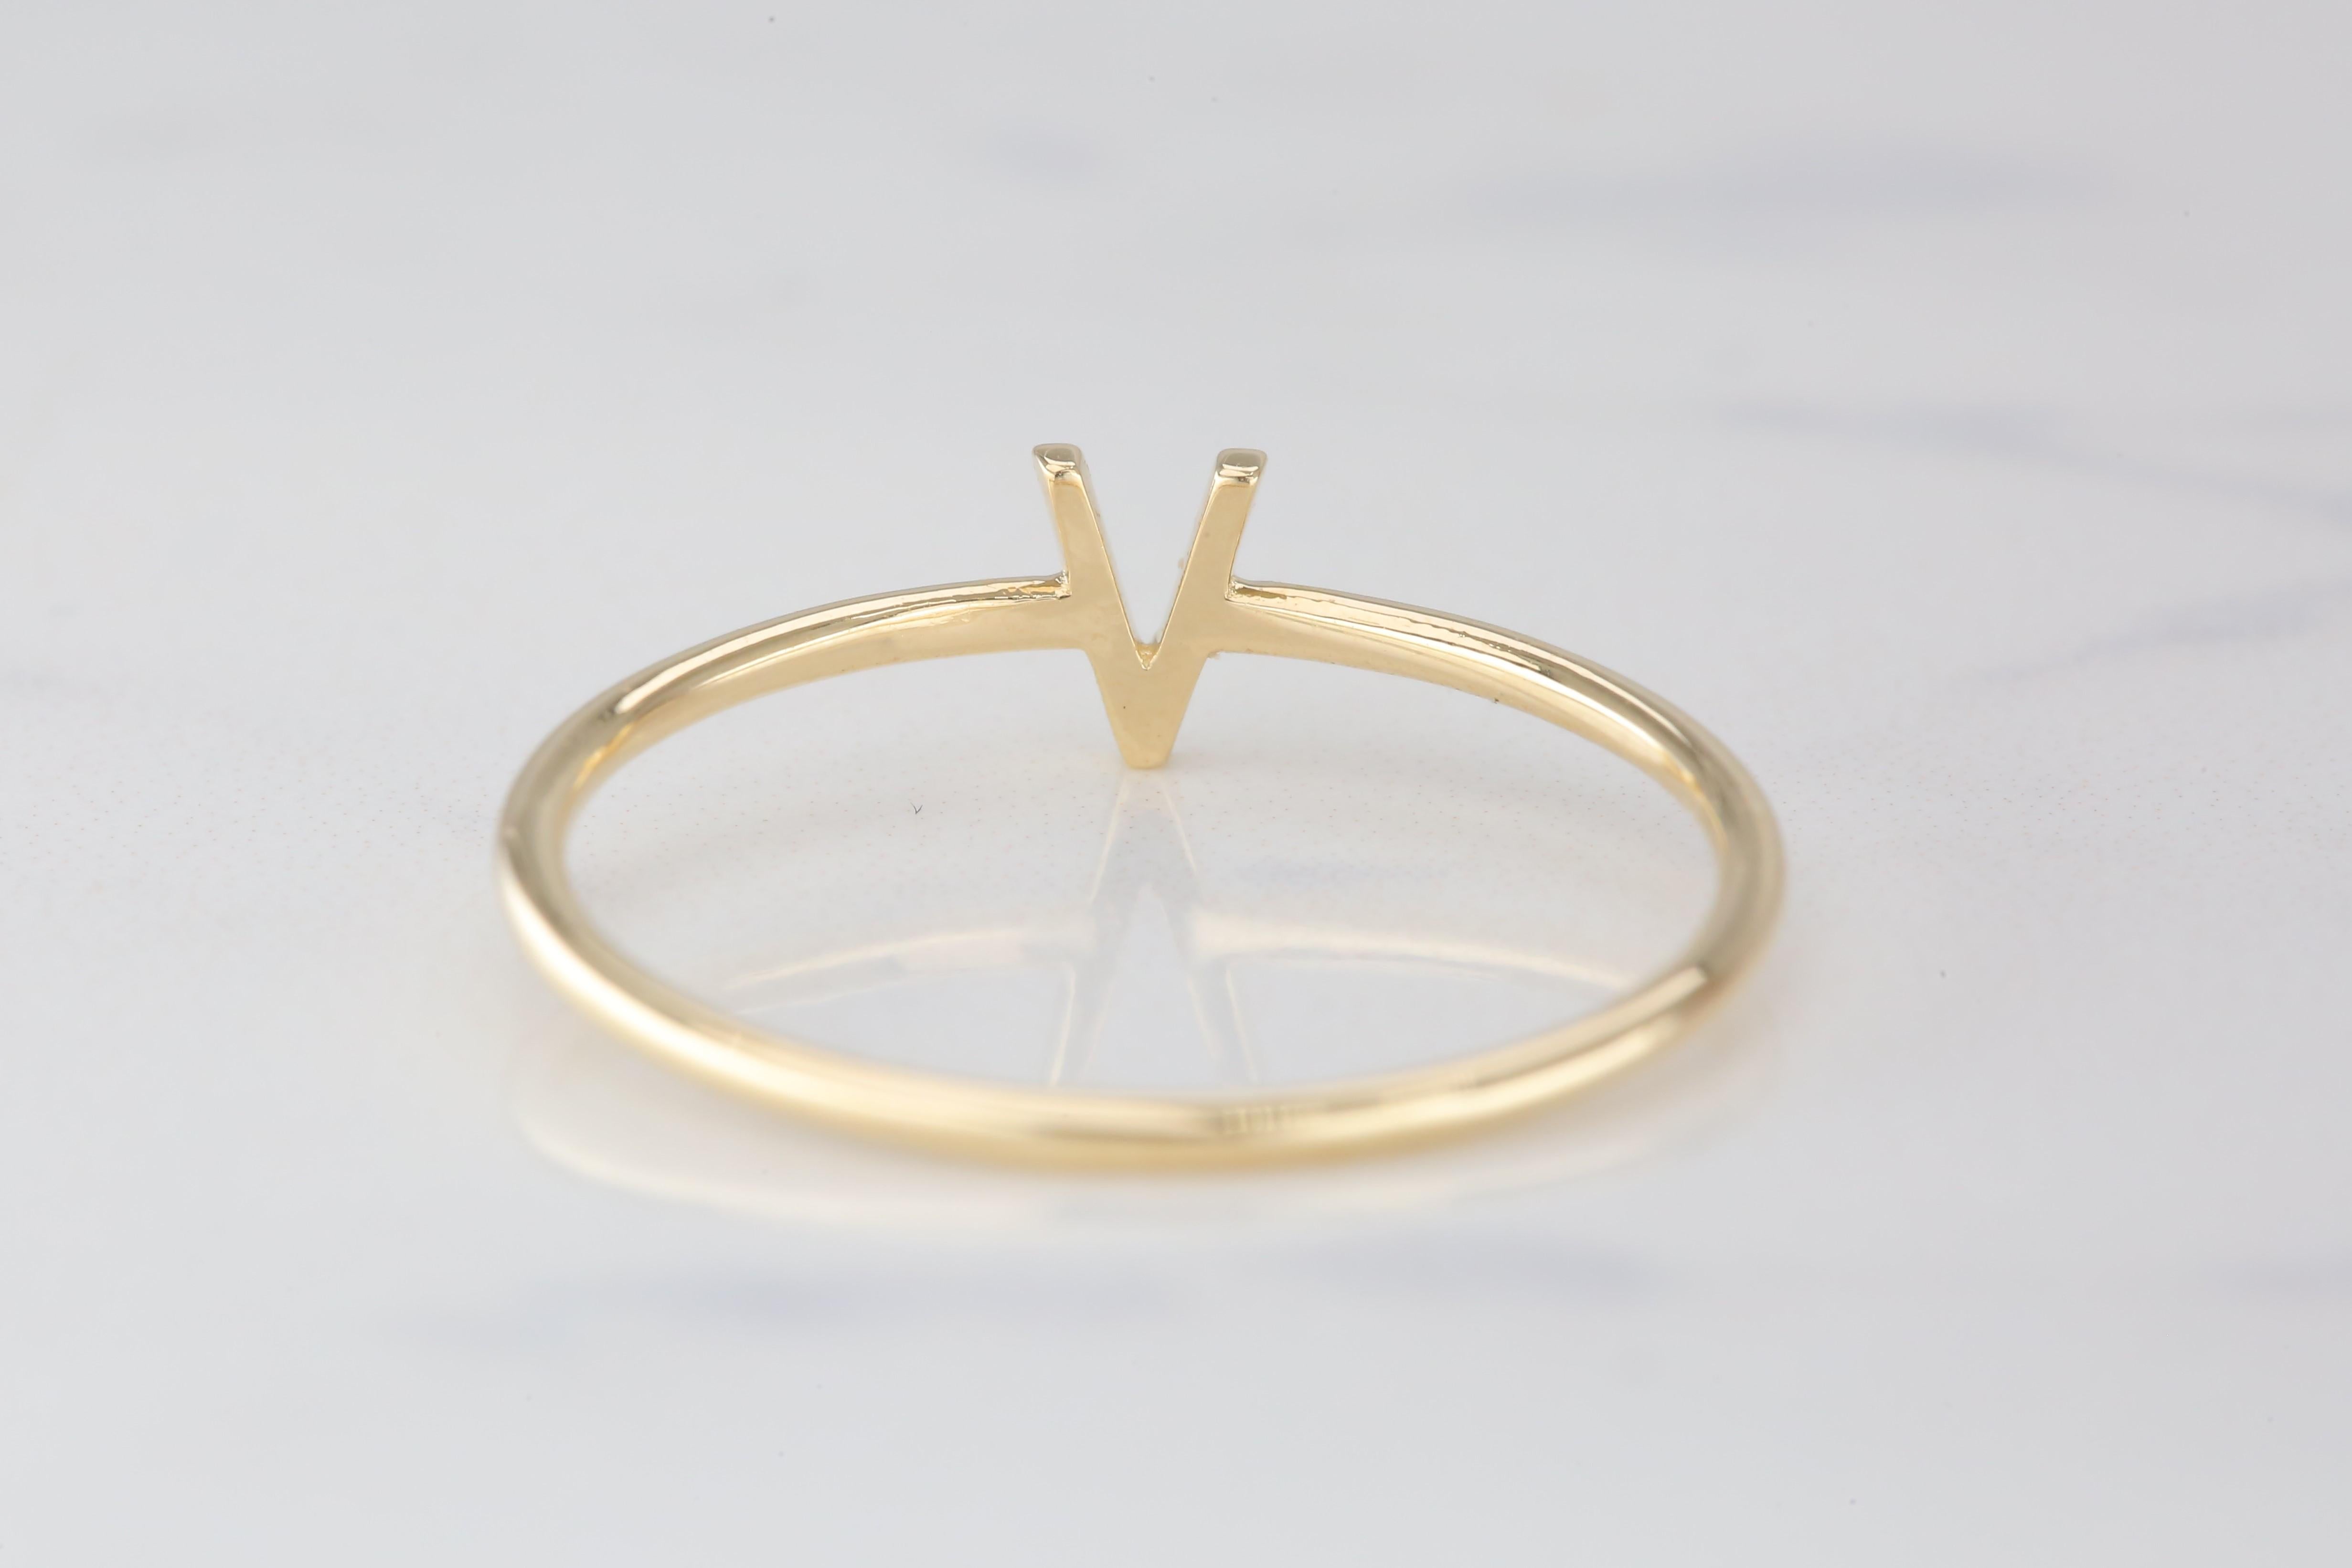 For Sale:  14K Gold Initial V Letter Ring, Personalized Initial Letter Ring 5